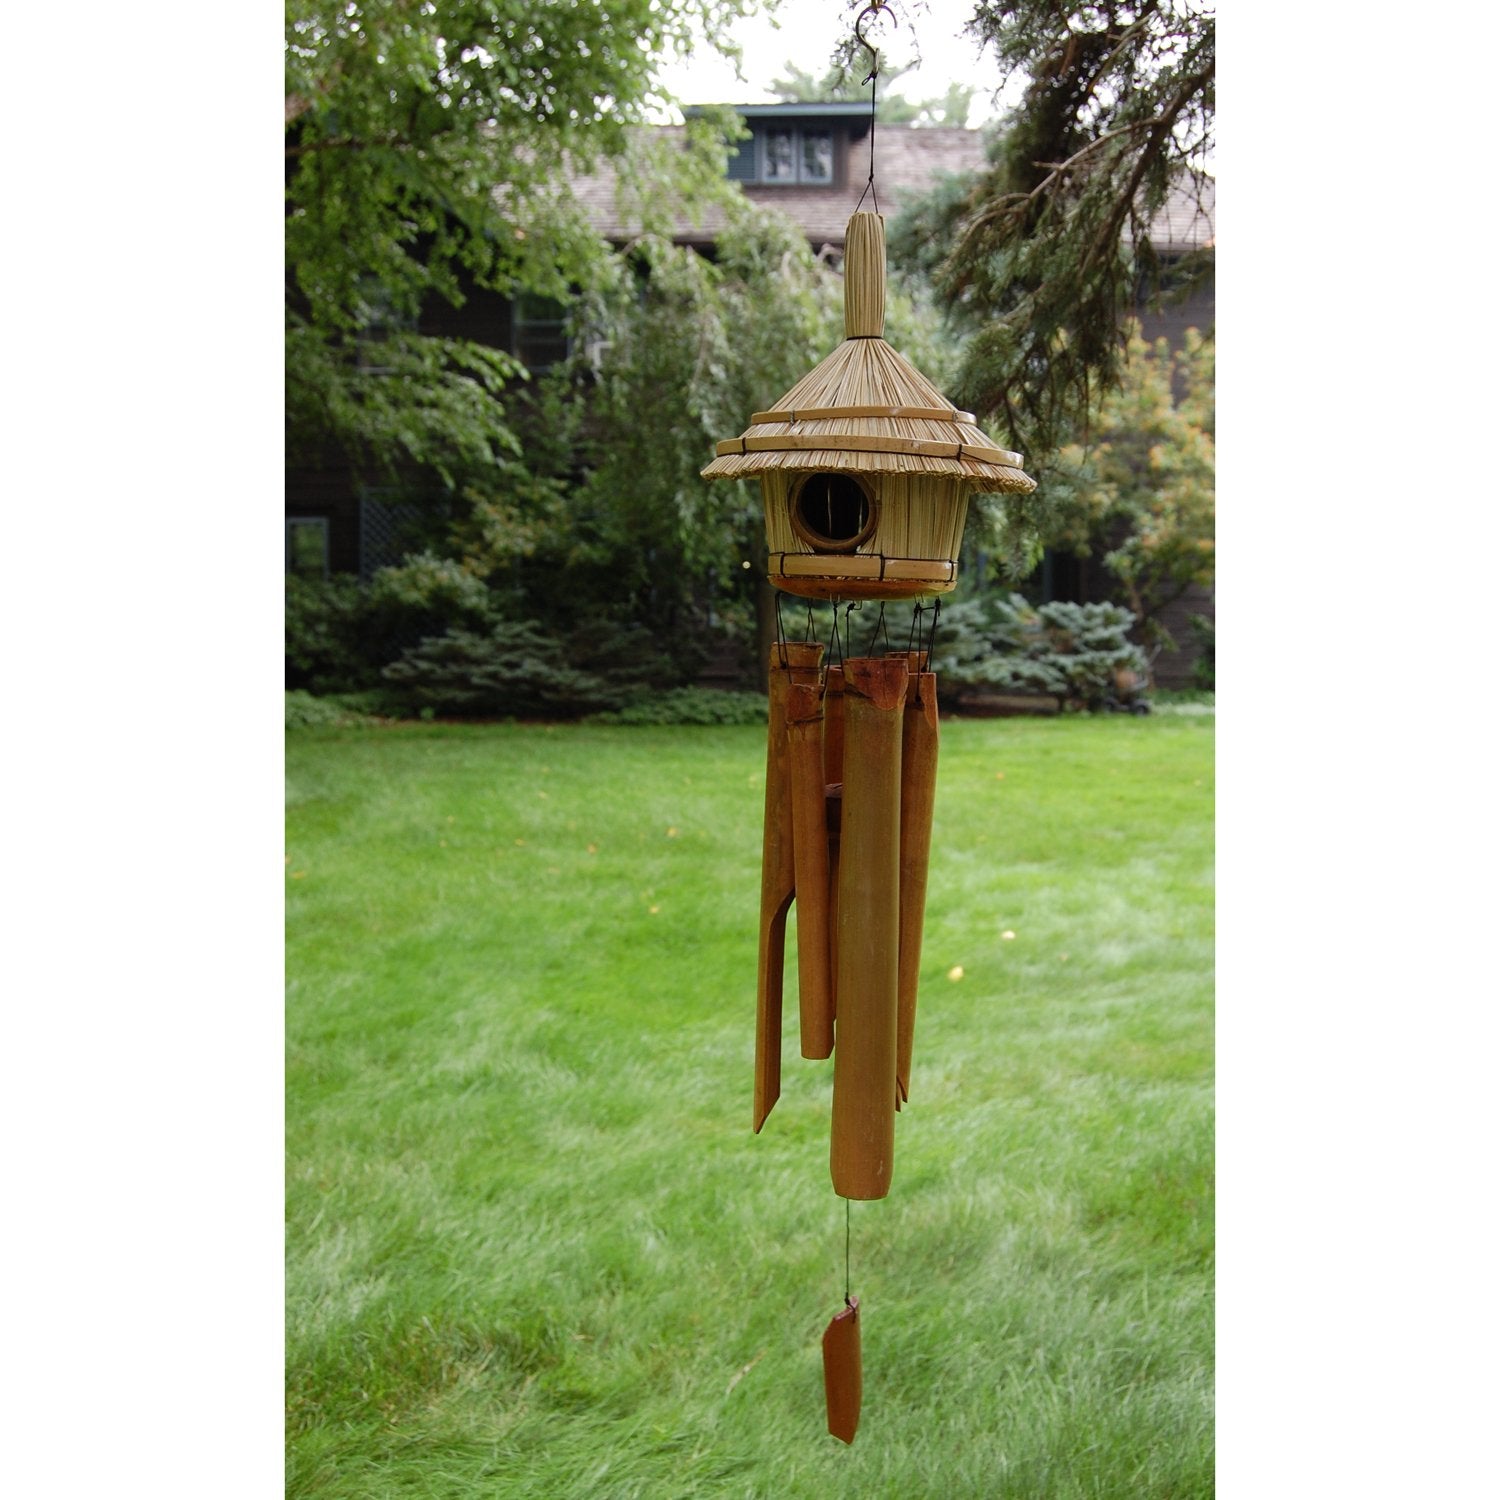 Thatched Roof Birdhouse Bamboo Chime alternate lifestyle image